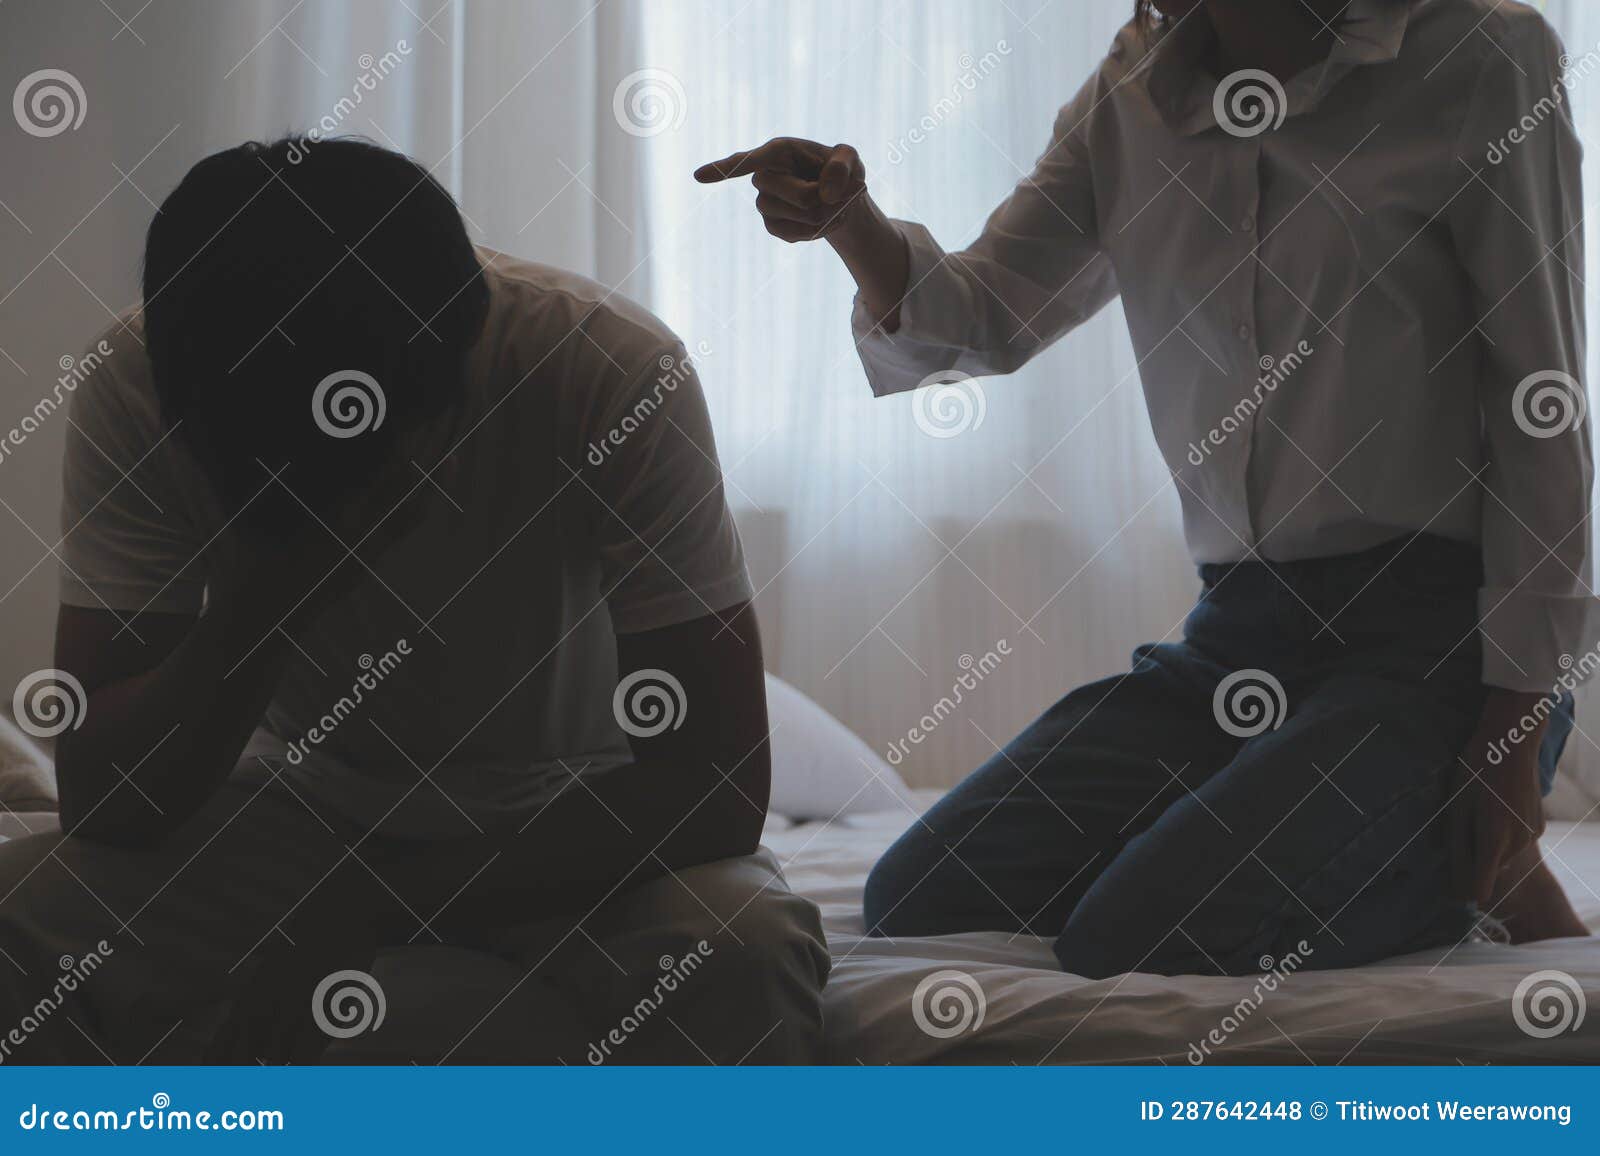 Woman Slapping Man Stock Photos picture